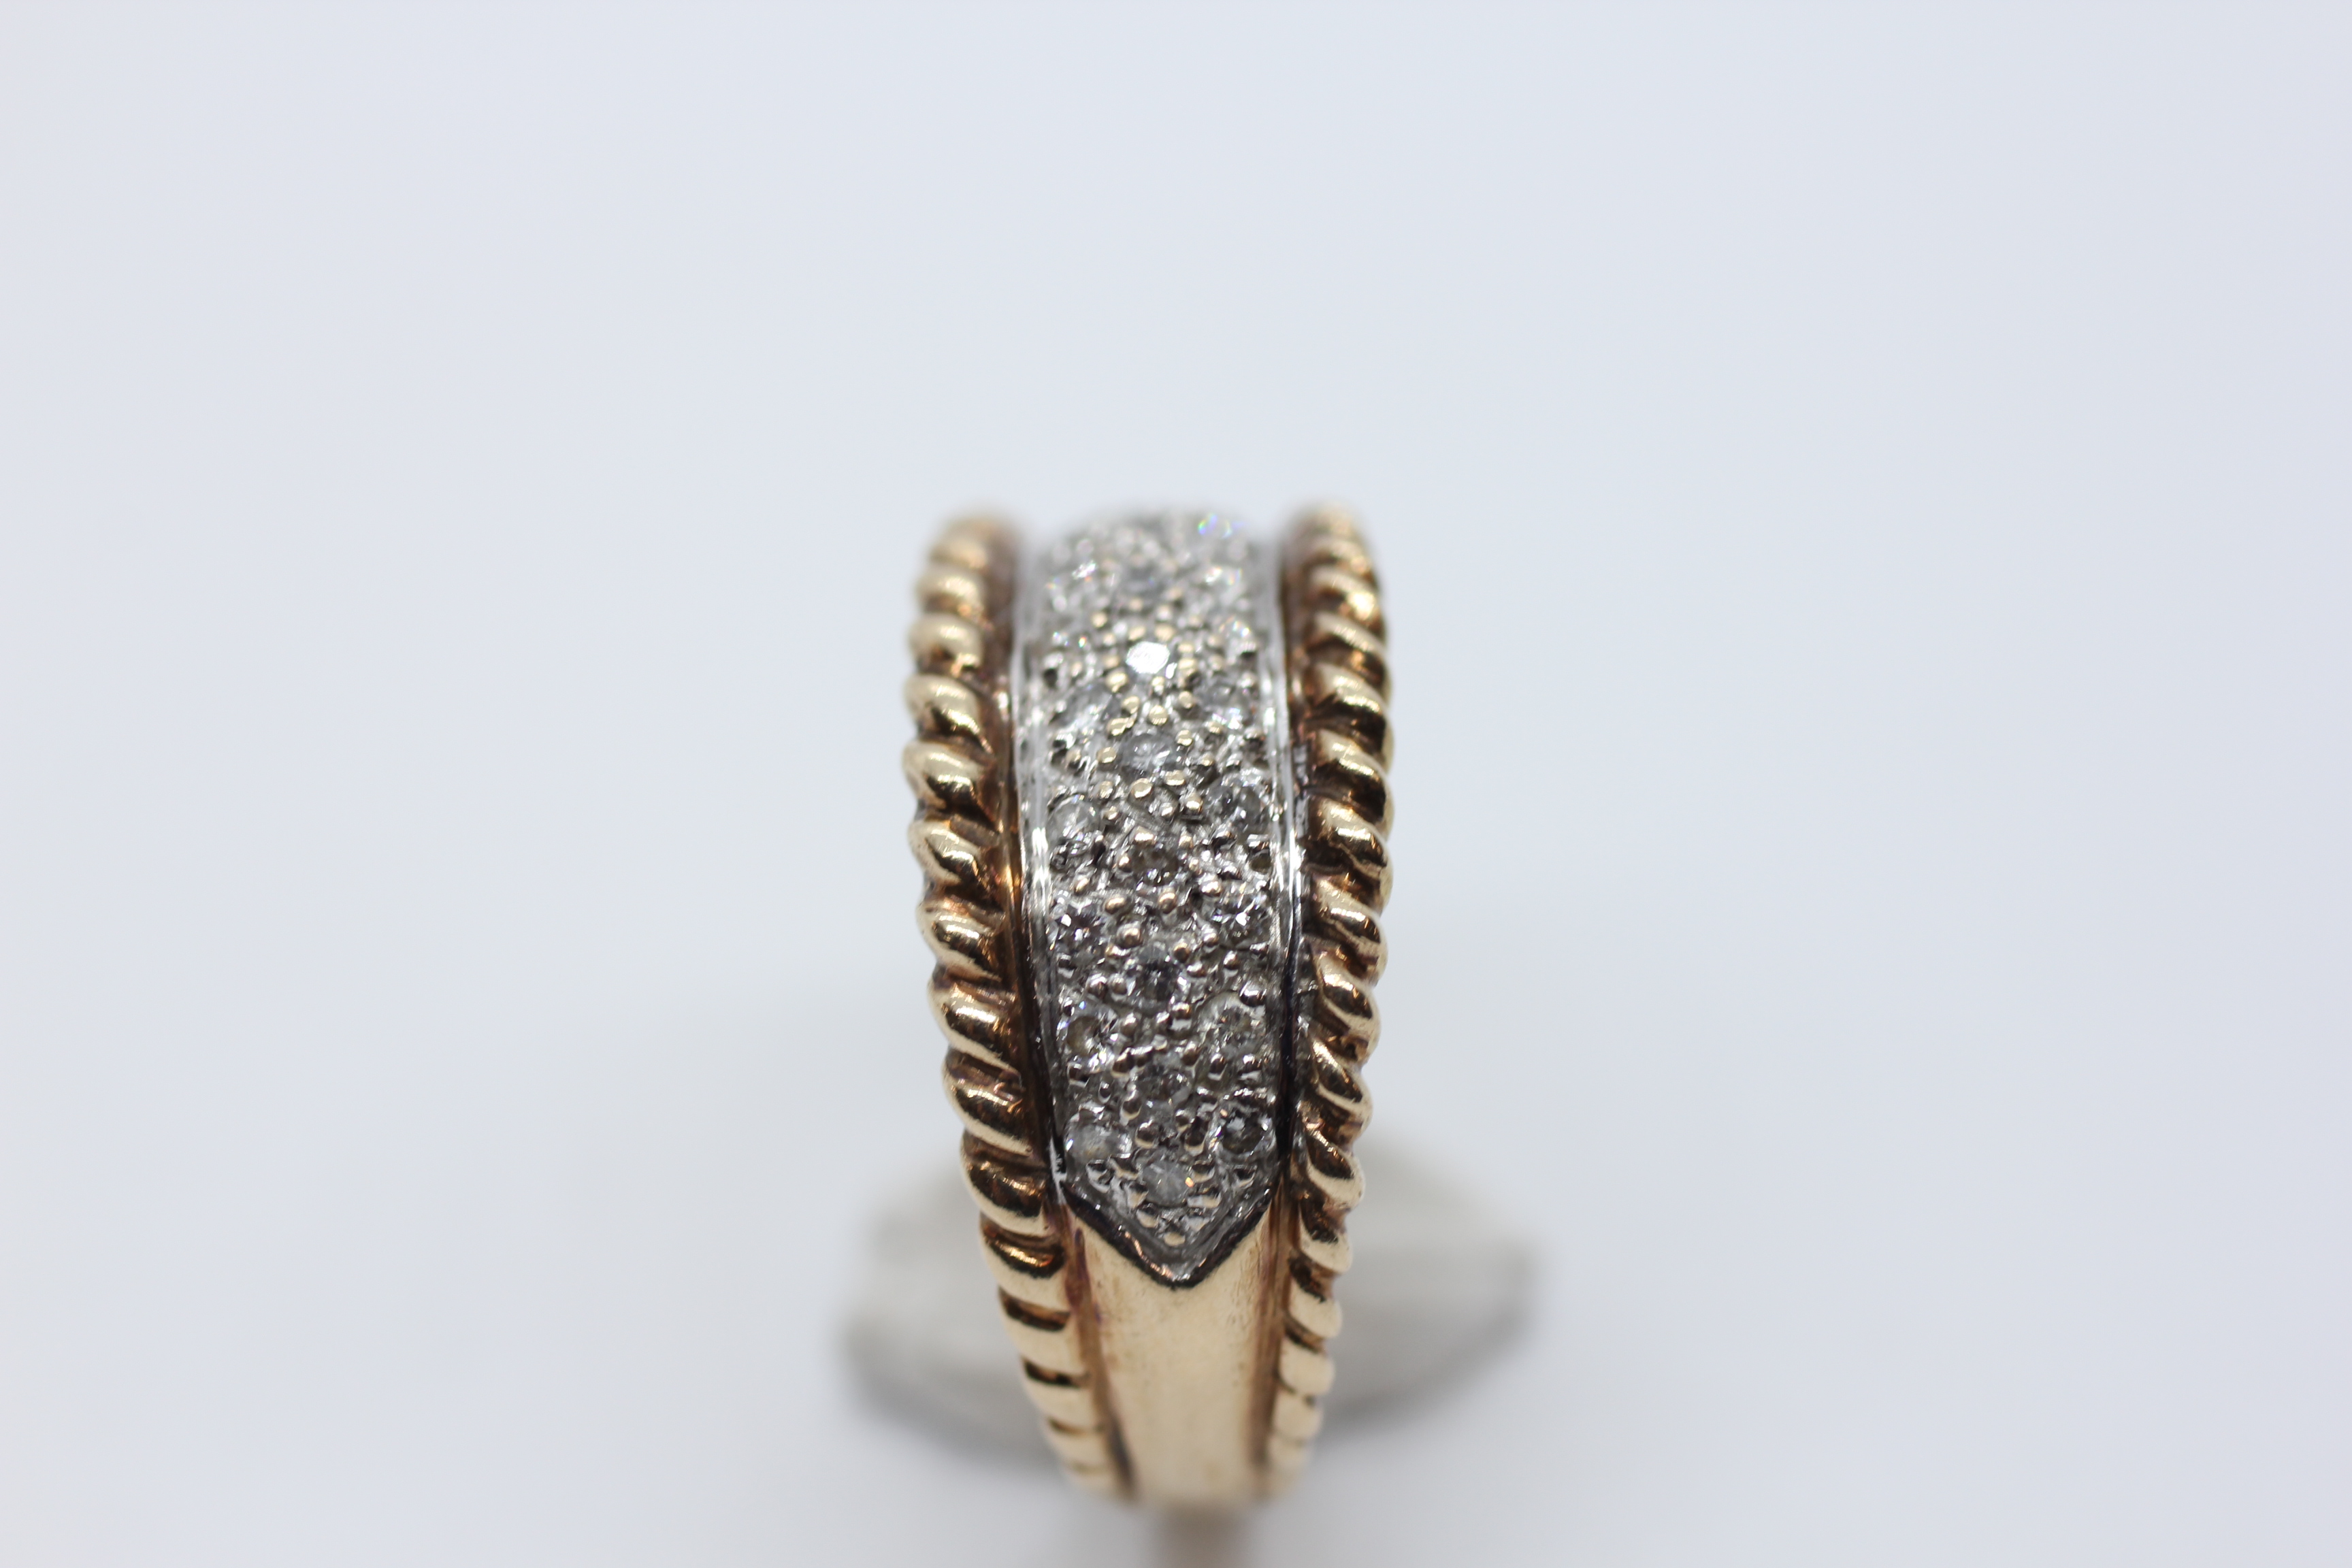 A DESIGNER 9CT GOLD RING SET WITH MULTIPLE DIAMONDS WITHIN A ROPE TRIM. - Image 11 of 13